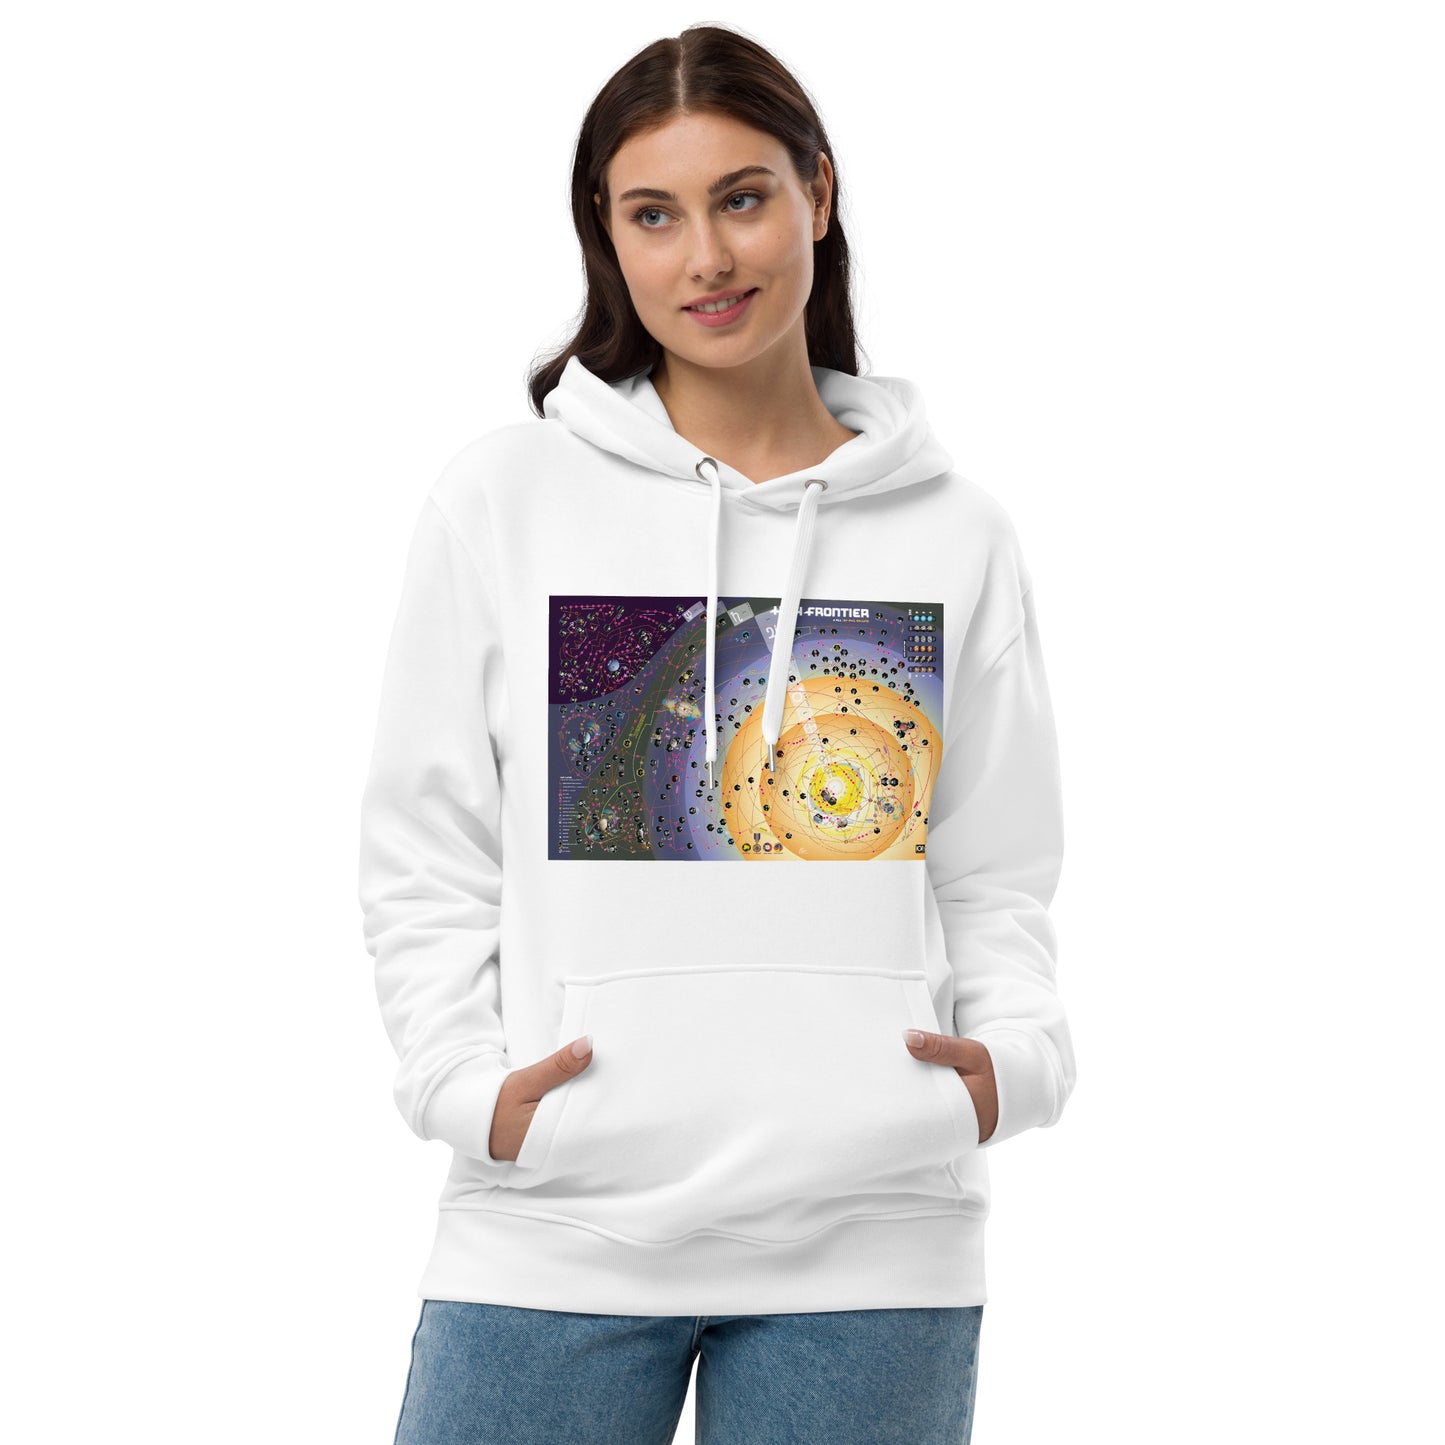 High Frontier 4 All Map Premium ECO Hoodie - White version of the hoodie being worn